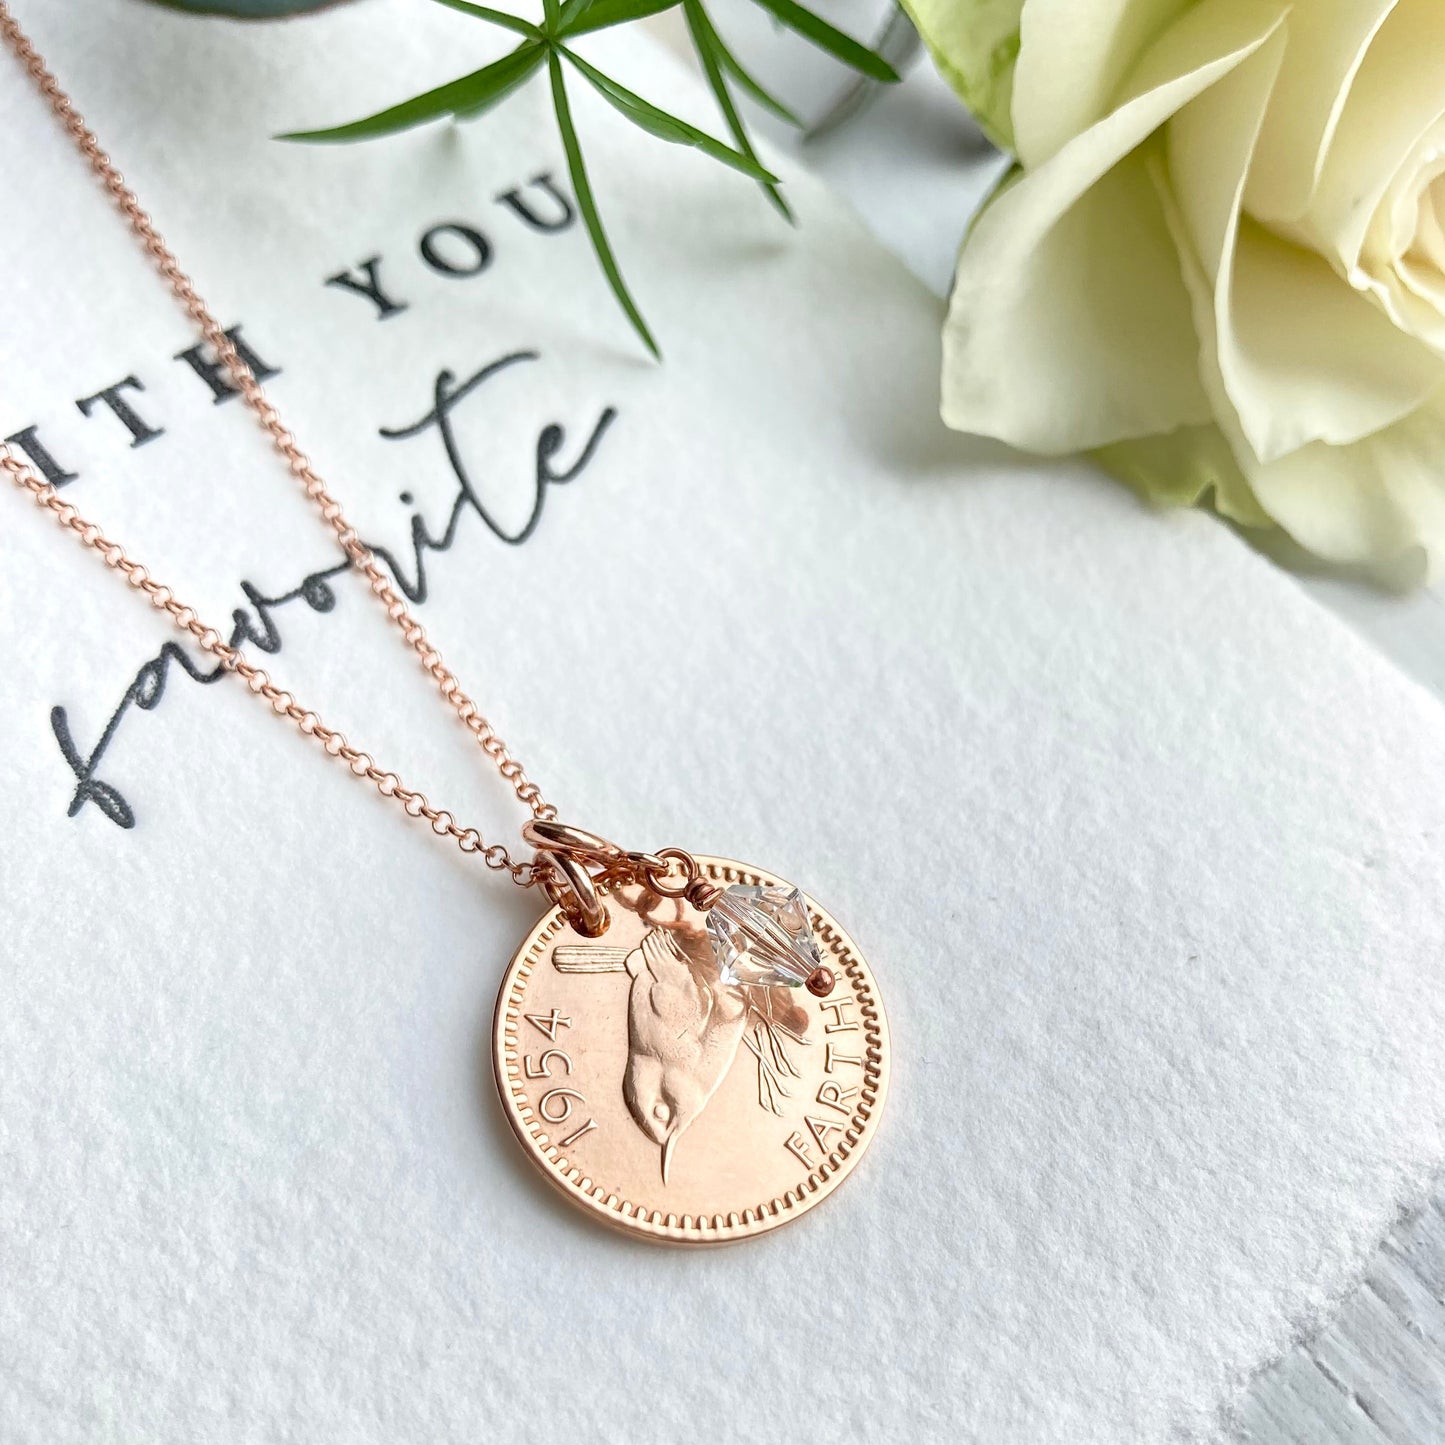 Gifts for 70th birthdays for her, 70th gifts for women, coin jewellery pendants